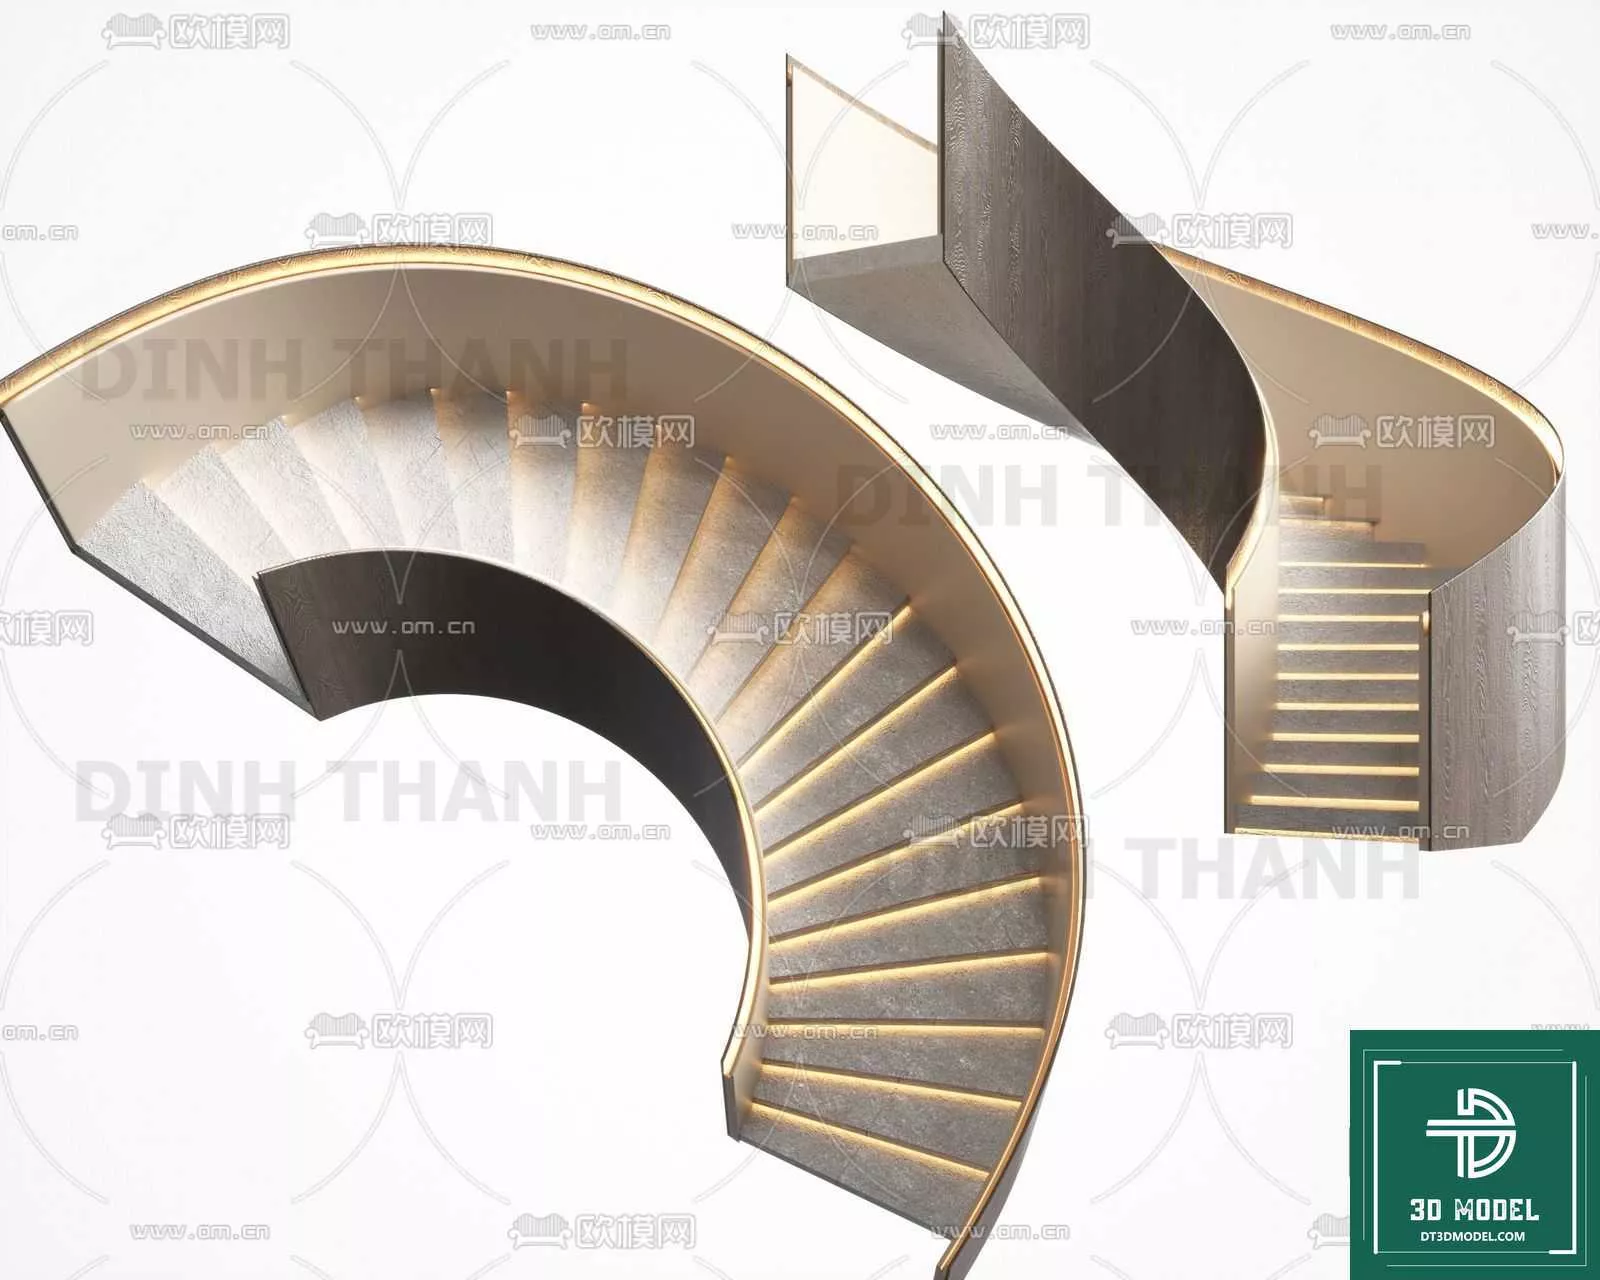 MODERN STAIR - SKETCHUP 3D MODEL - VRAY OR ENSCAPE - ID14306